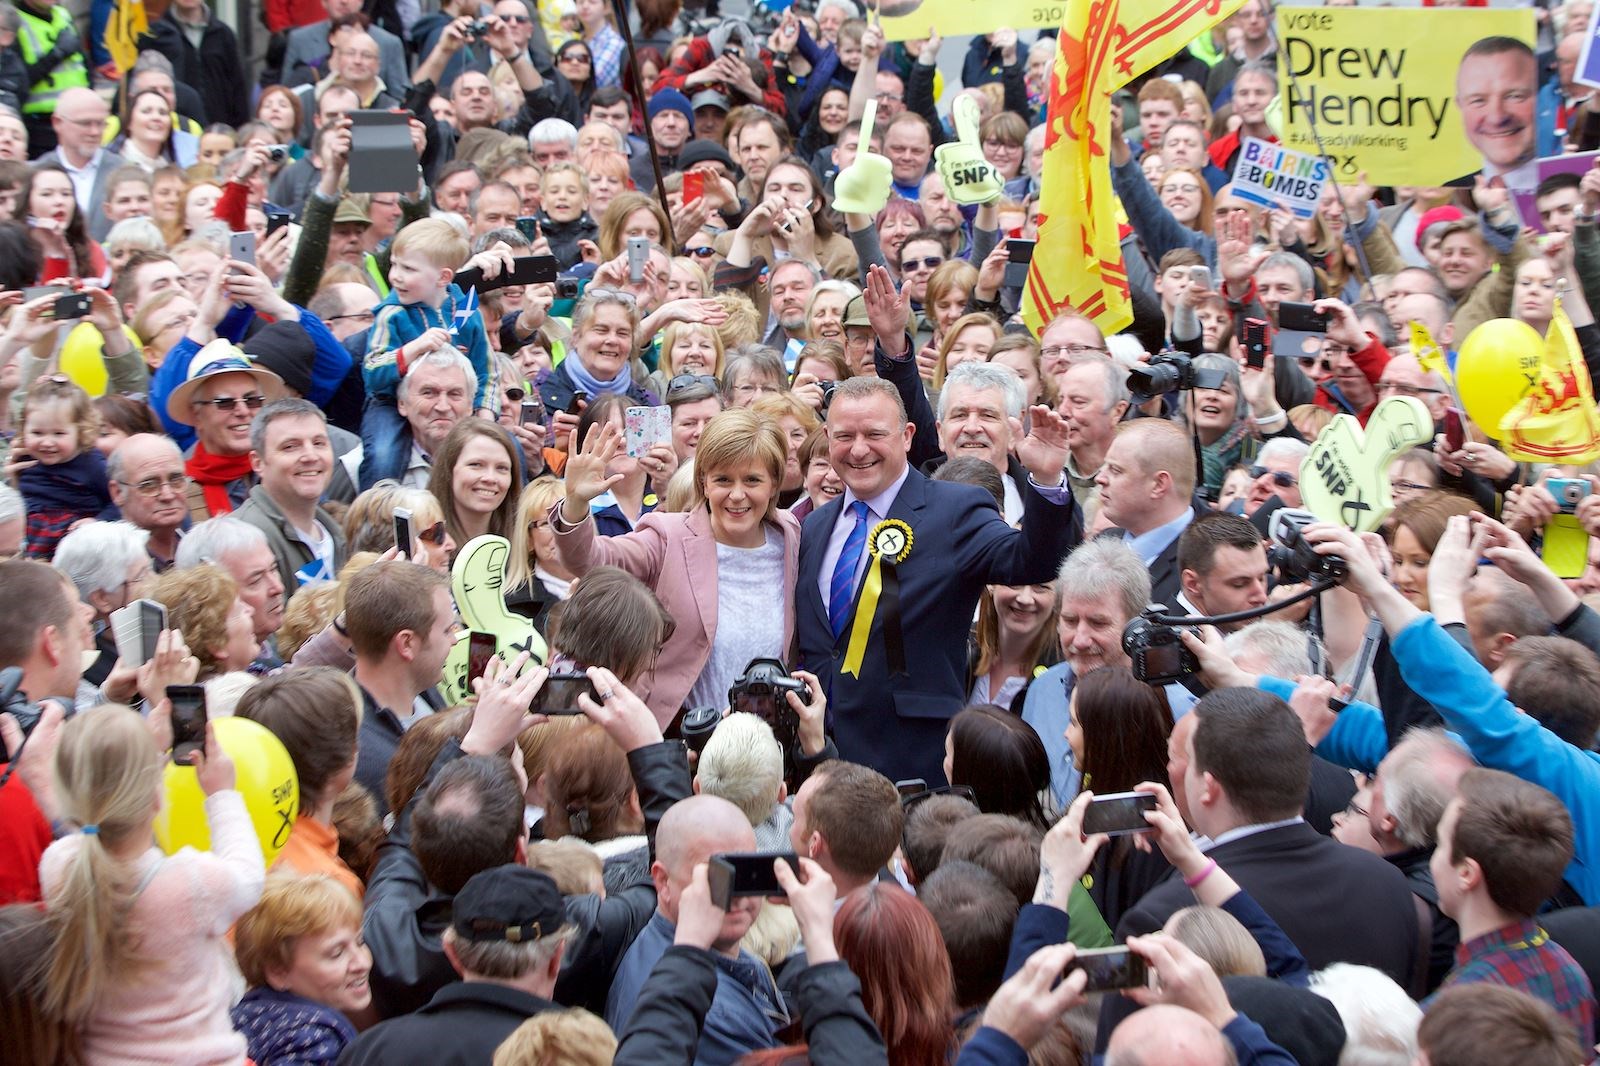 Nicola Sturgeon is met with a huge crowd as she arrives in the Highland capital. Pictured is Inverness candidate, Drew Hendry...Picture: Paul Campbell .Tel: 07790 299920.